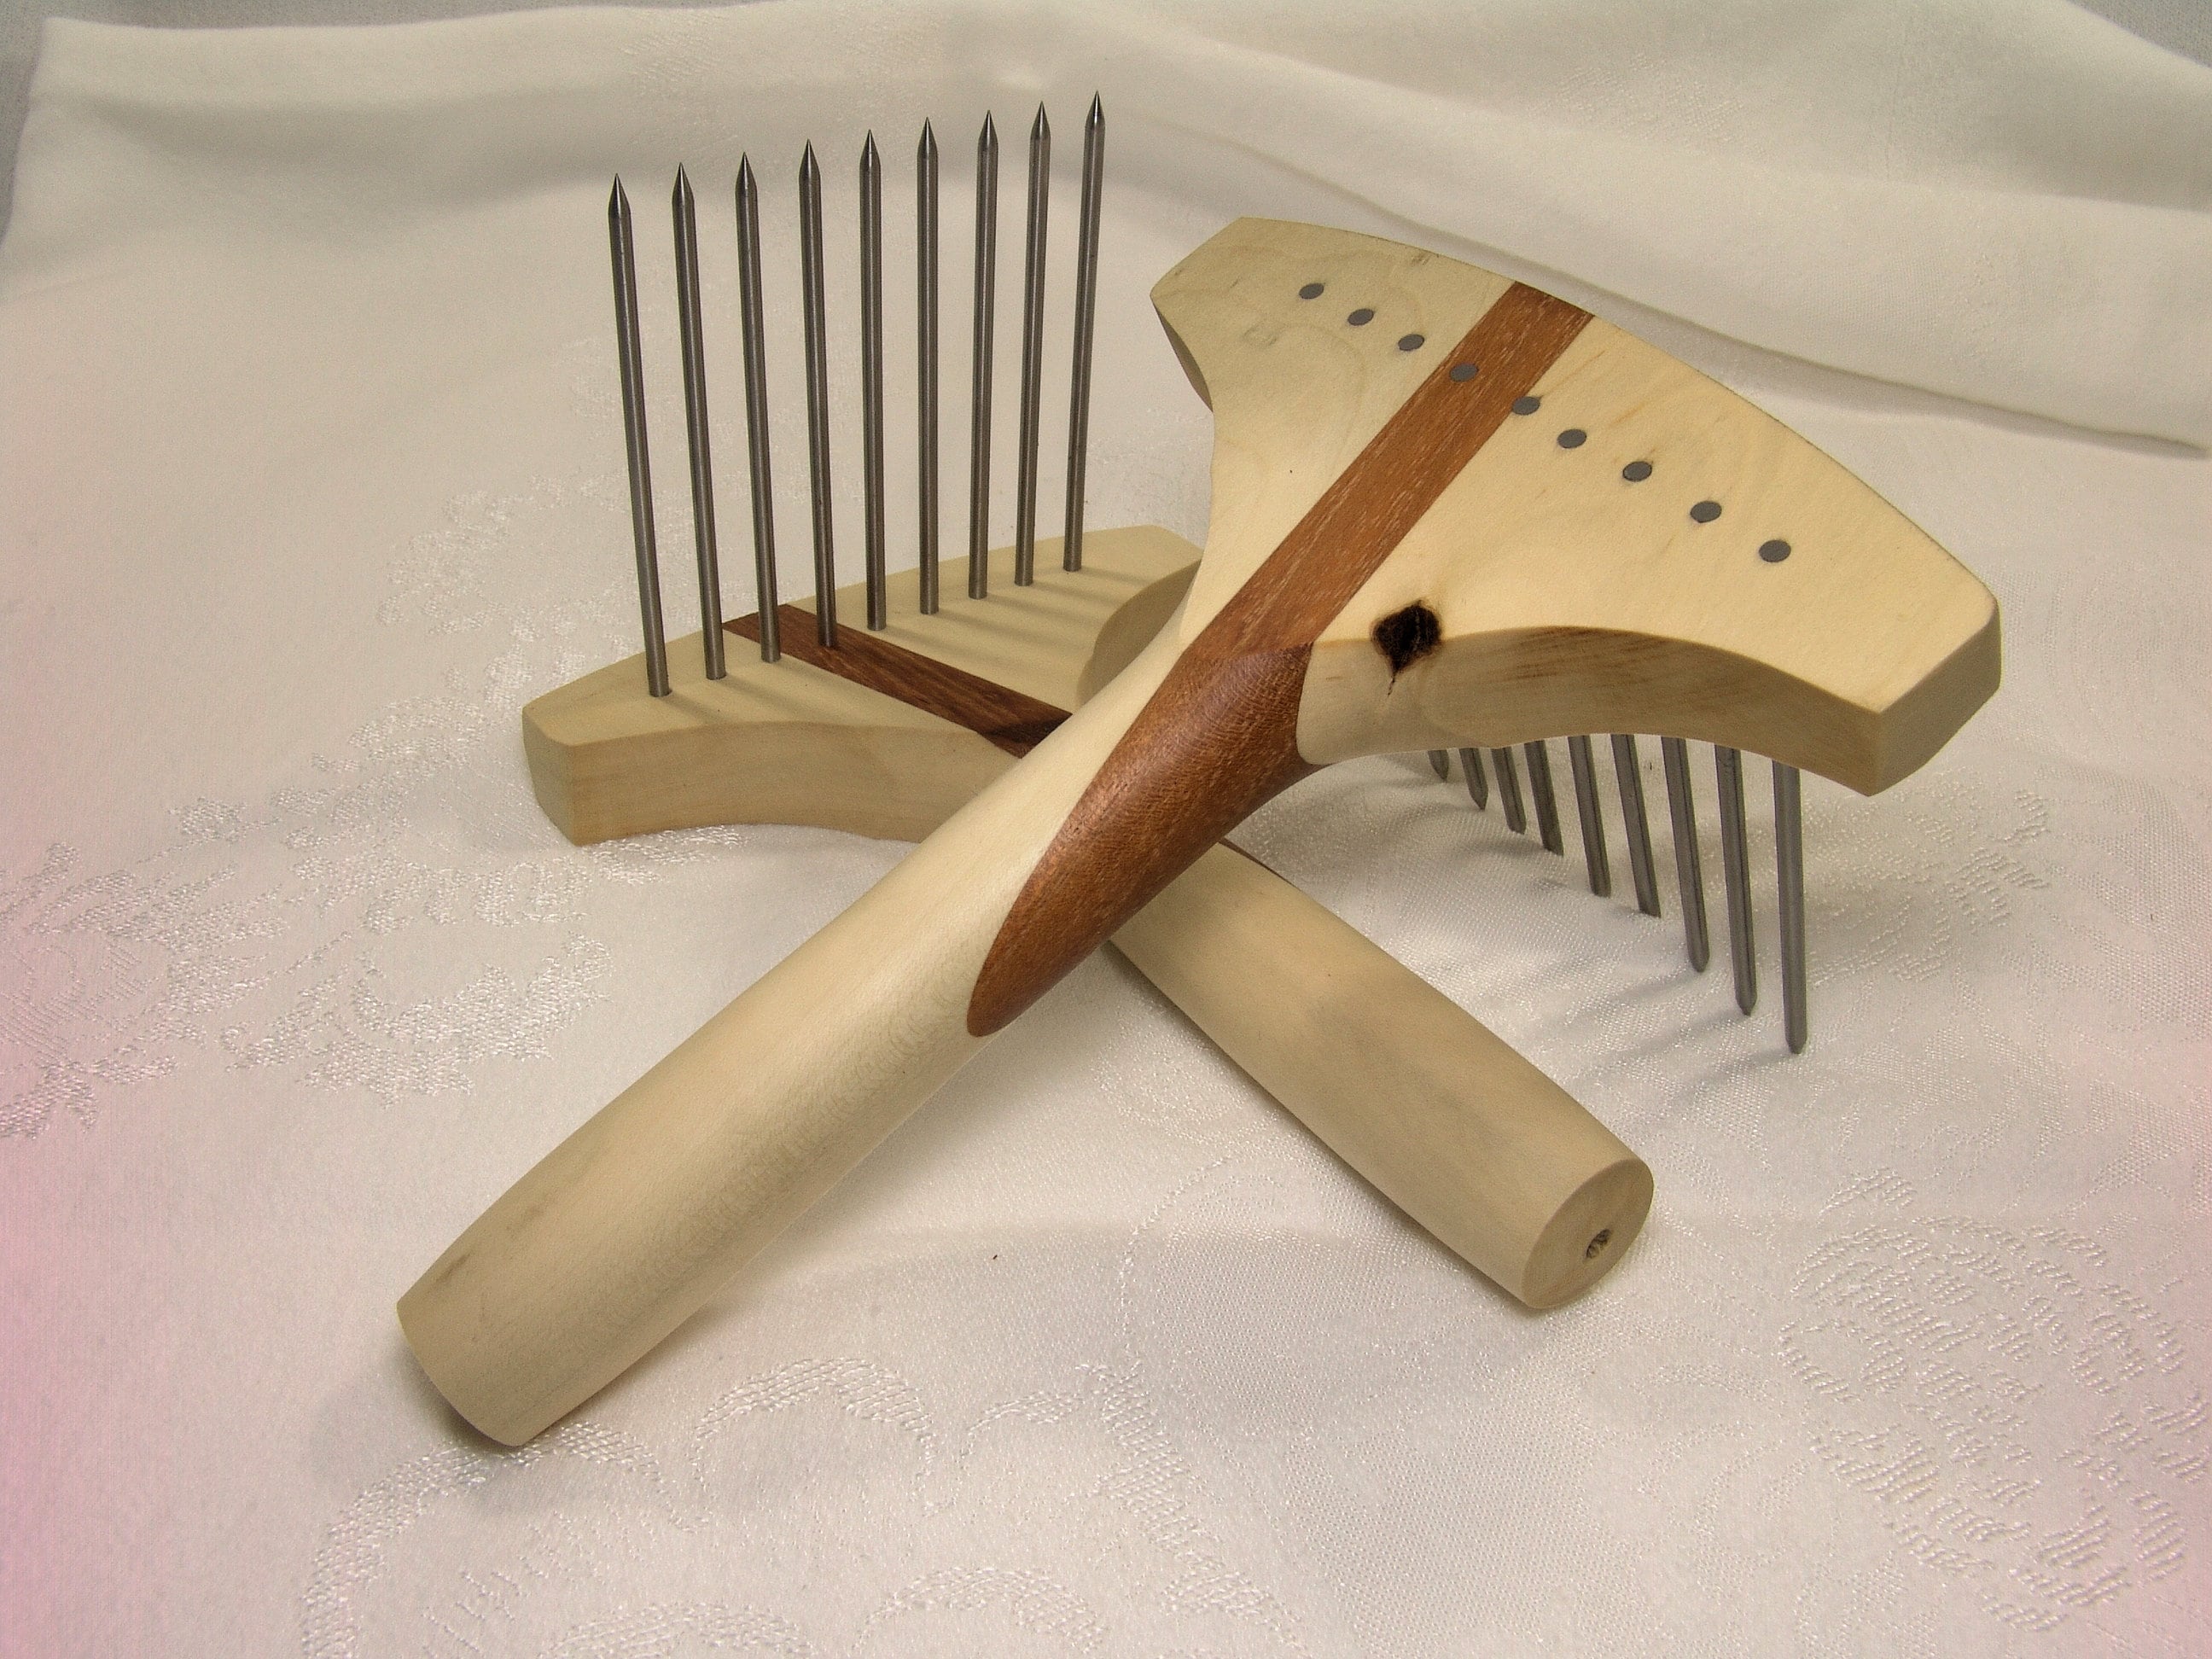 Viking and Wool Comb Holding Fixture